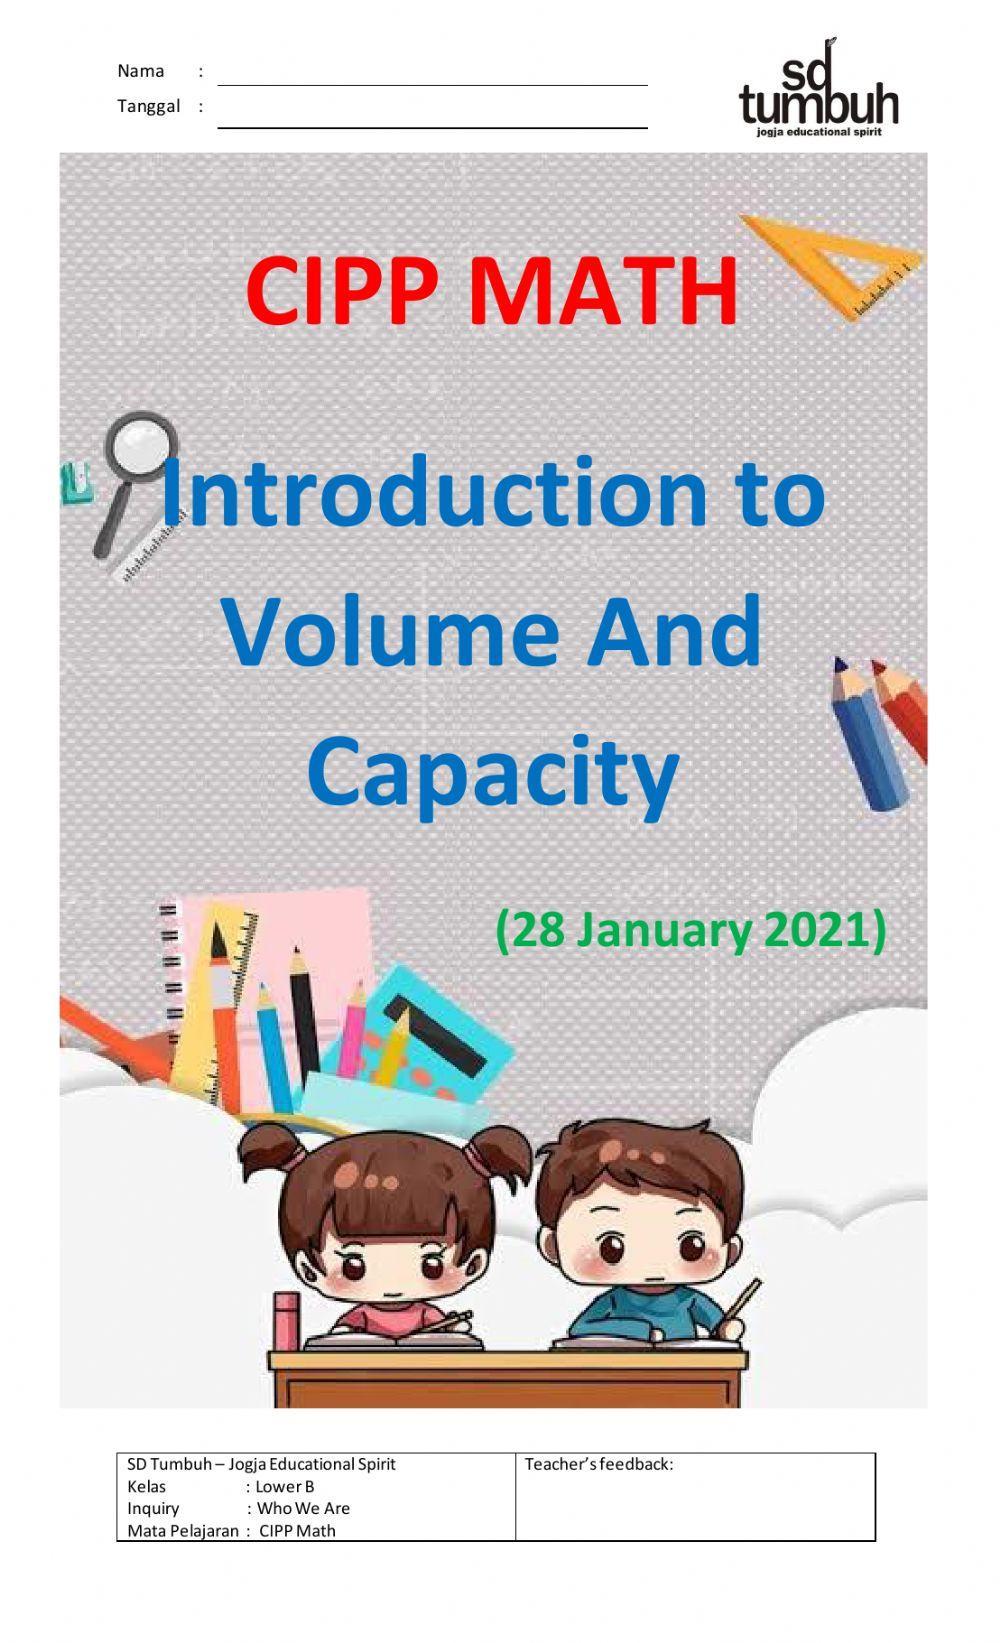 Introduction to volume and capacity